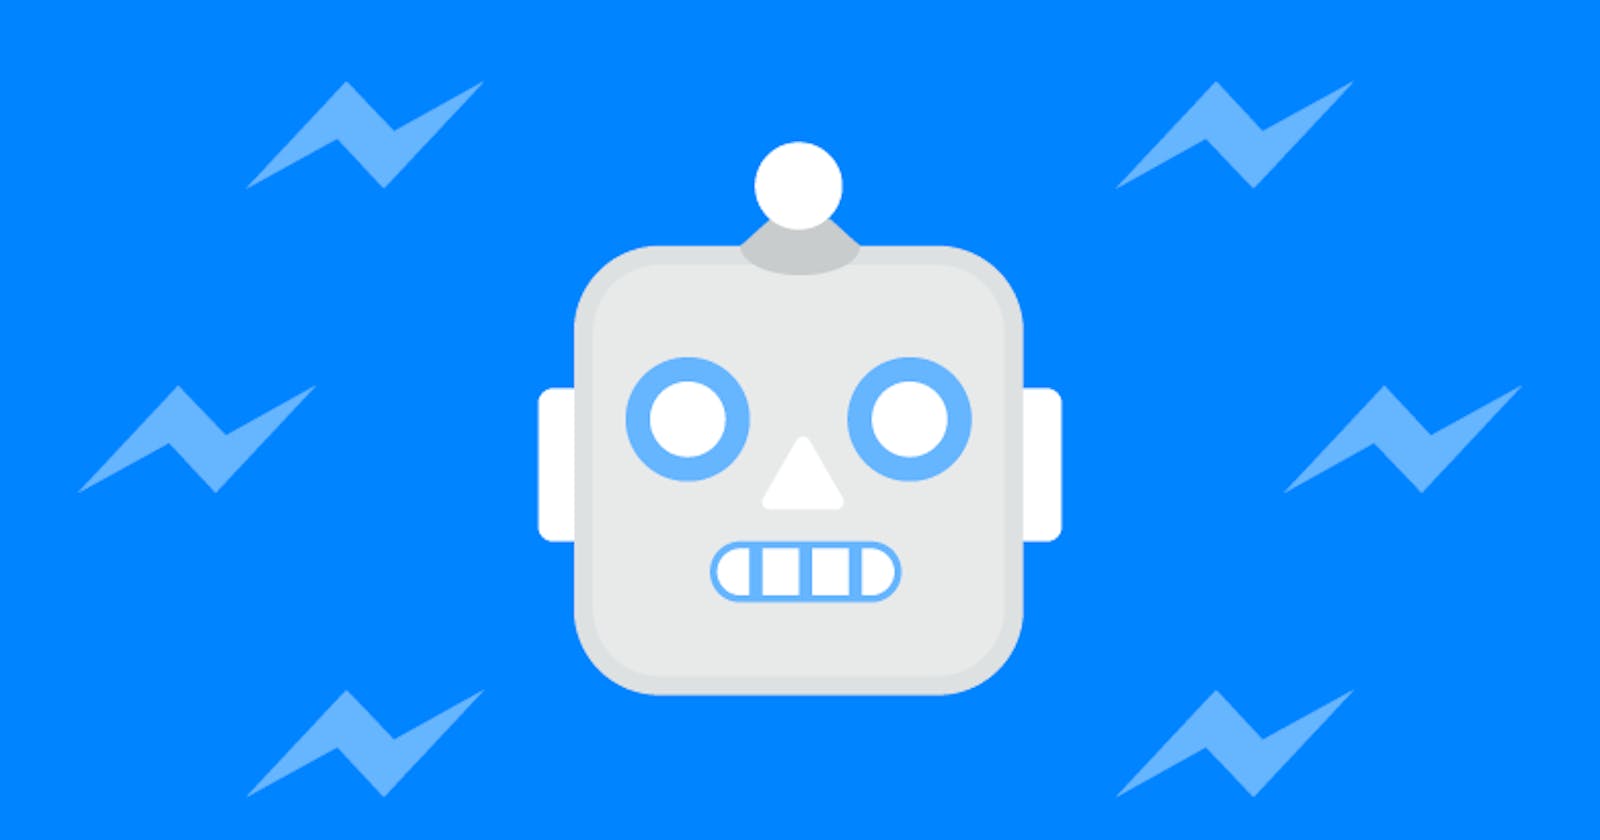 How to build a bot for Twitter in Node (20 lines)